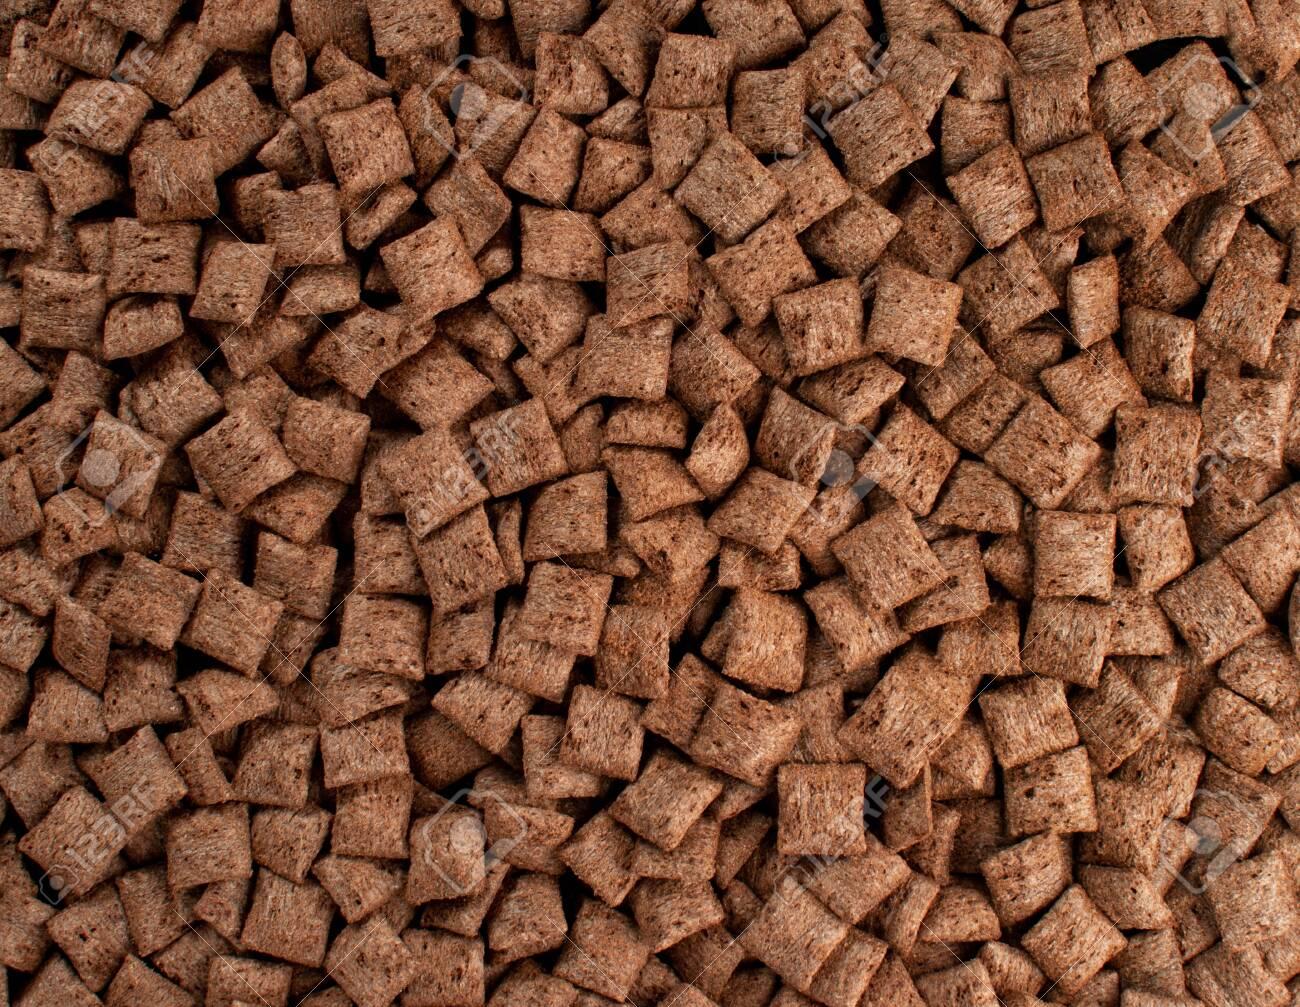 Chocolate Pillows Background Texture Brown Choco Cereal Pads